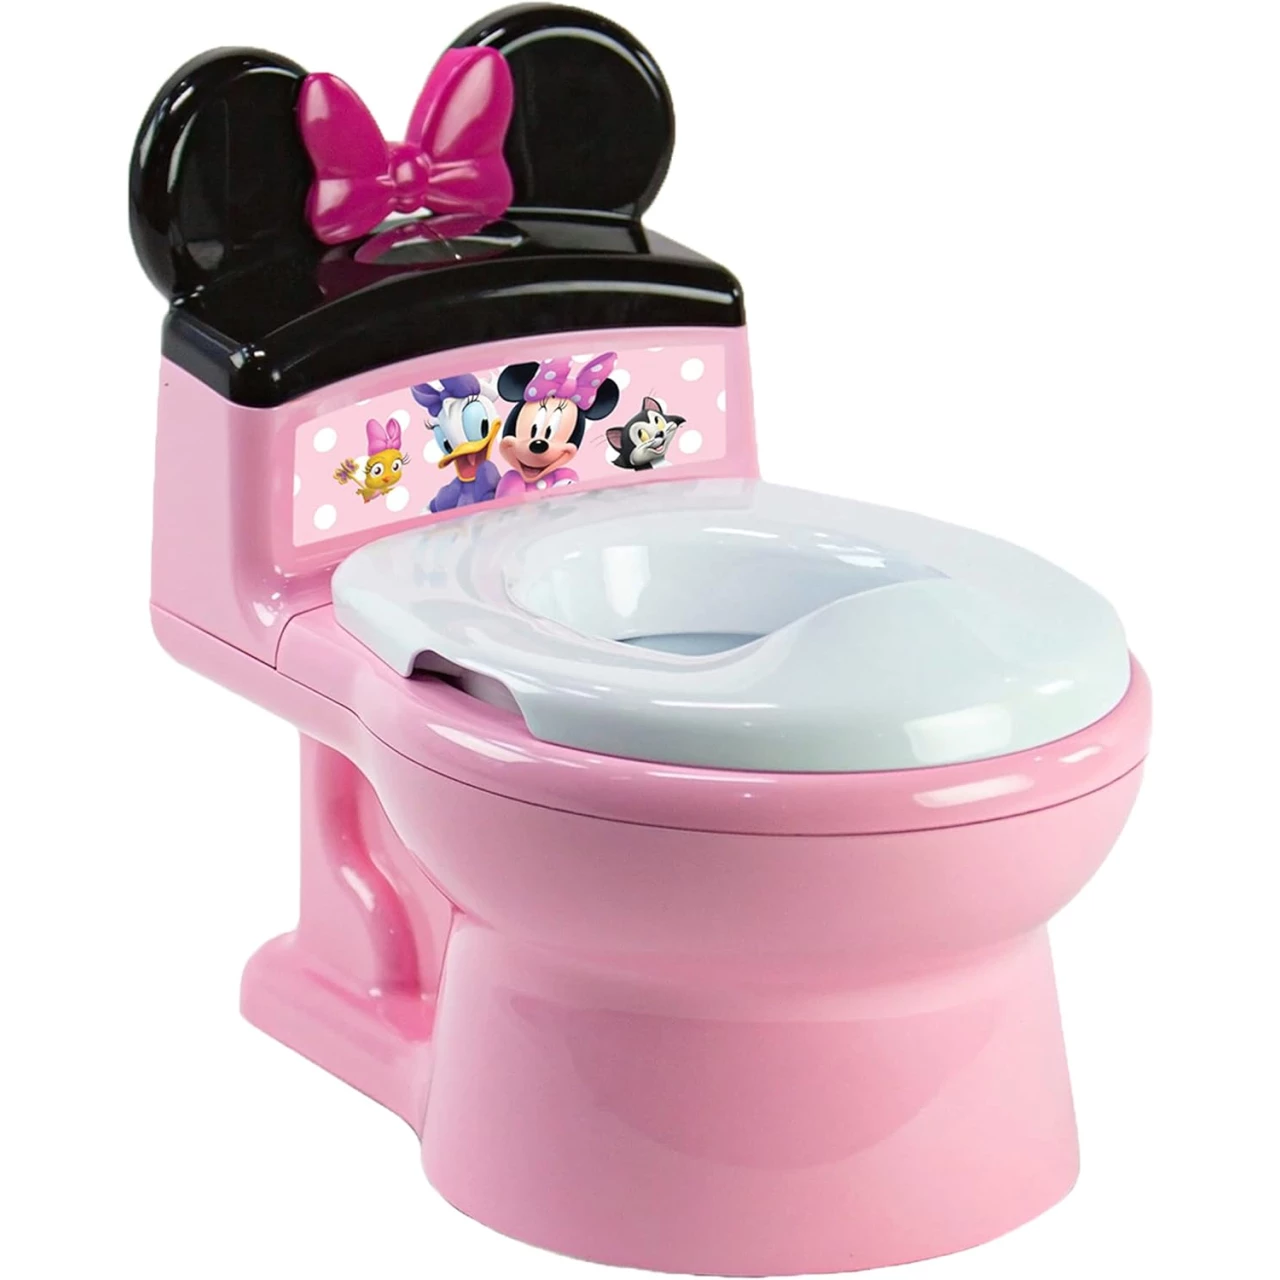 The First Years Disney Minnie Mouse Potty Training Toilet and Toddler Toilet Seat